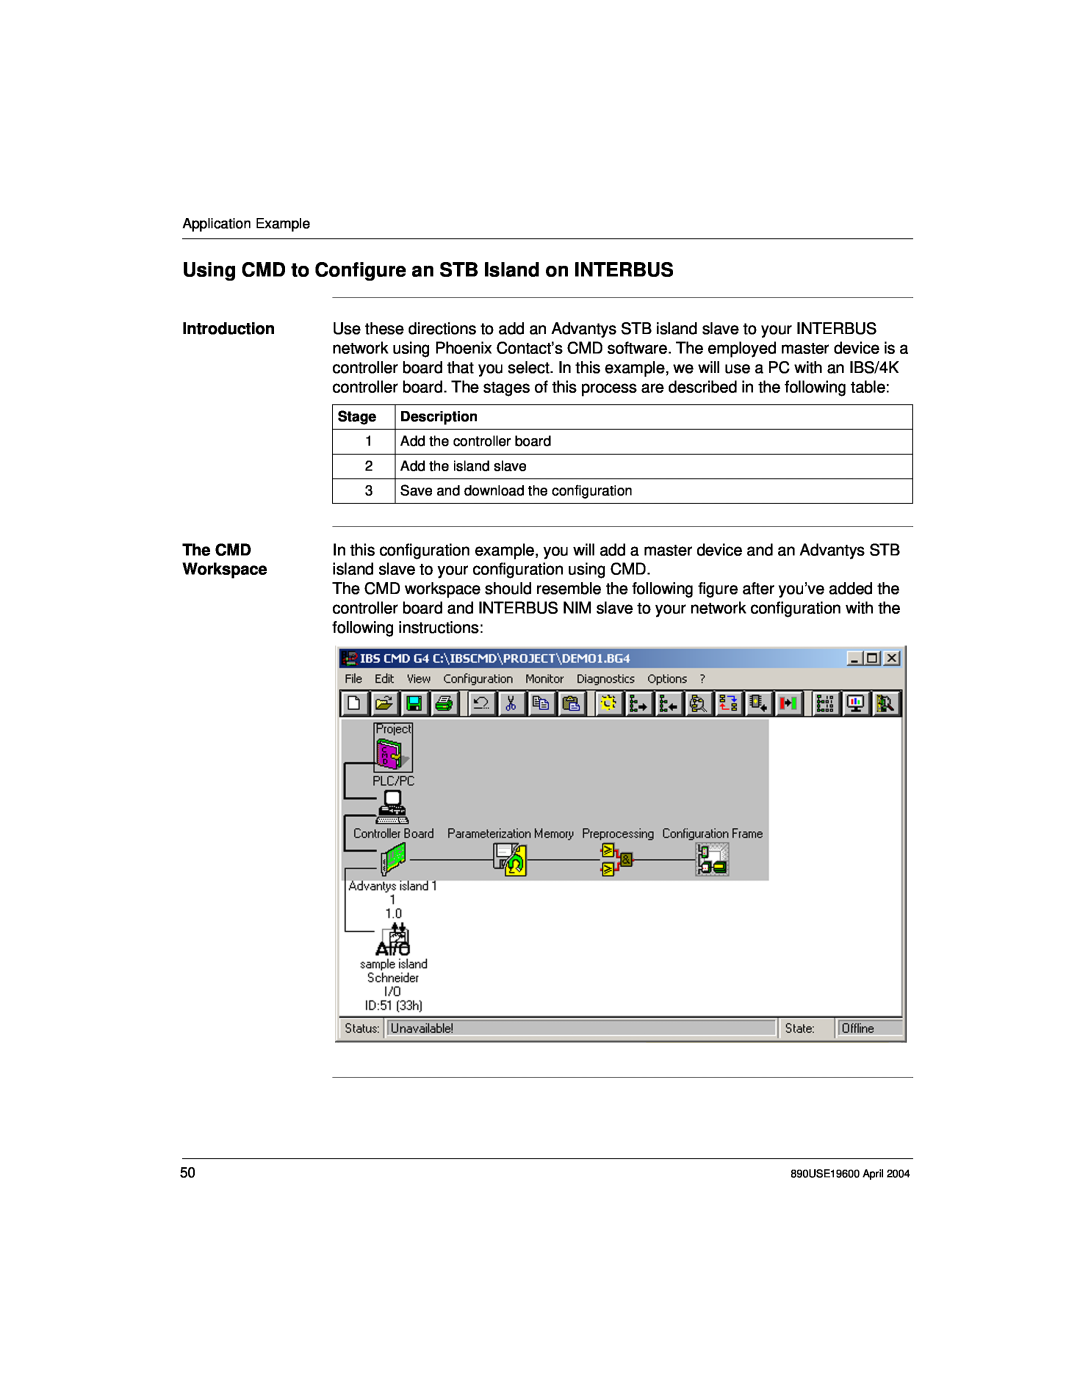 Schneider Electric 890USE19600 Version 1.0 manual Using CMD to Configure an STB Island on INTERBUS 